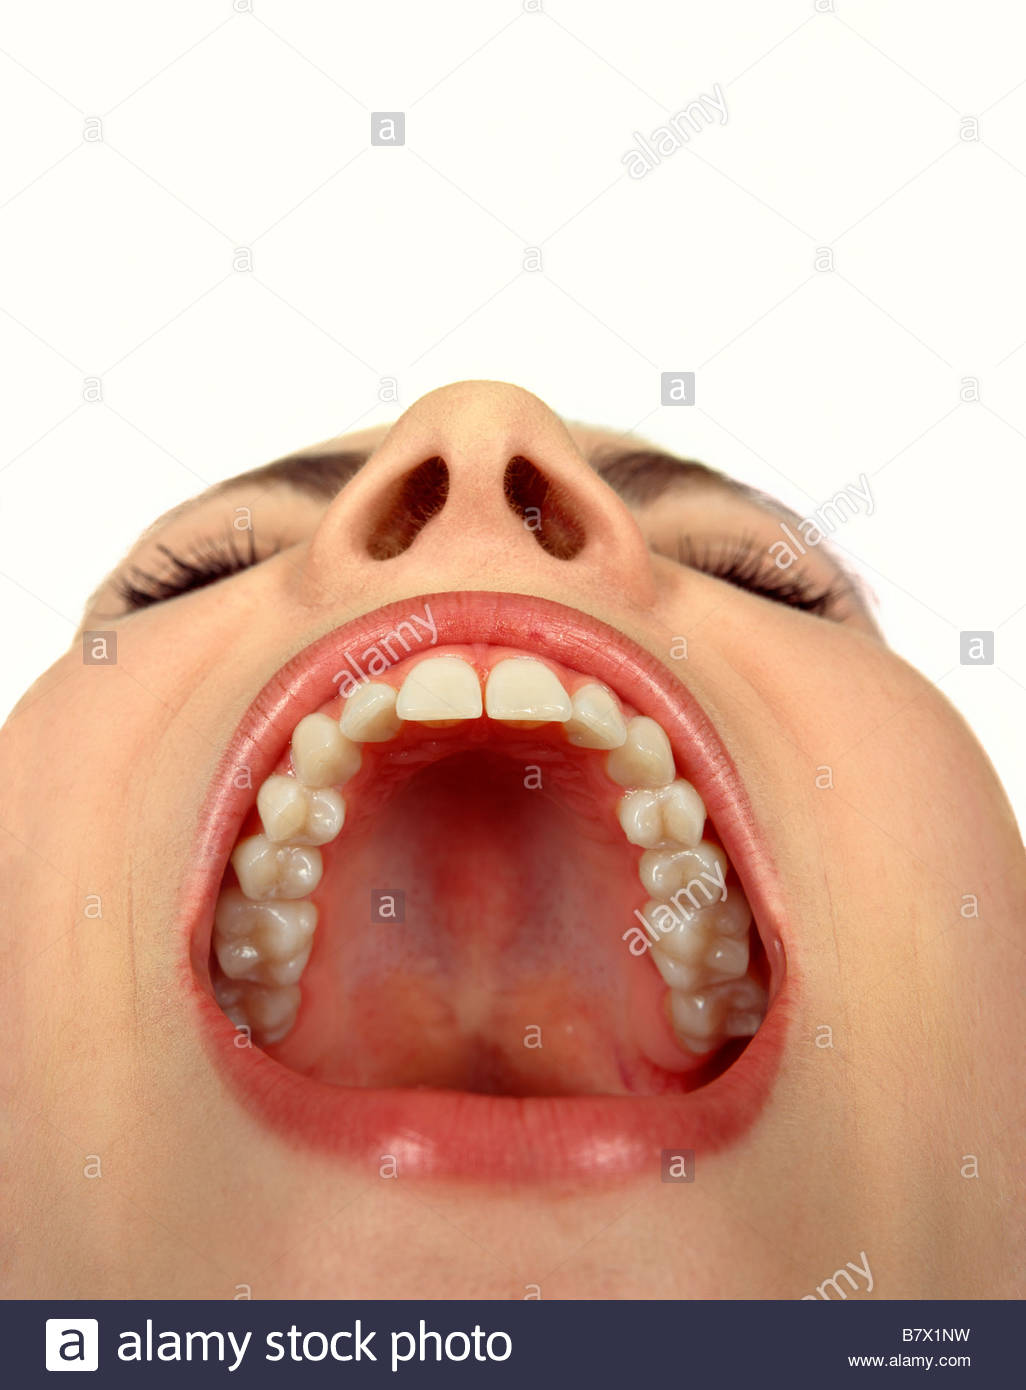 Woman With Mouth Open 76